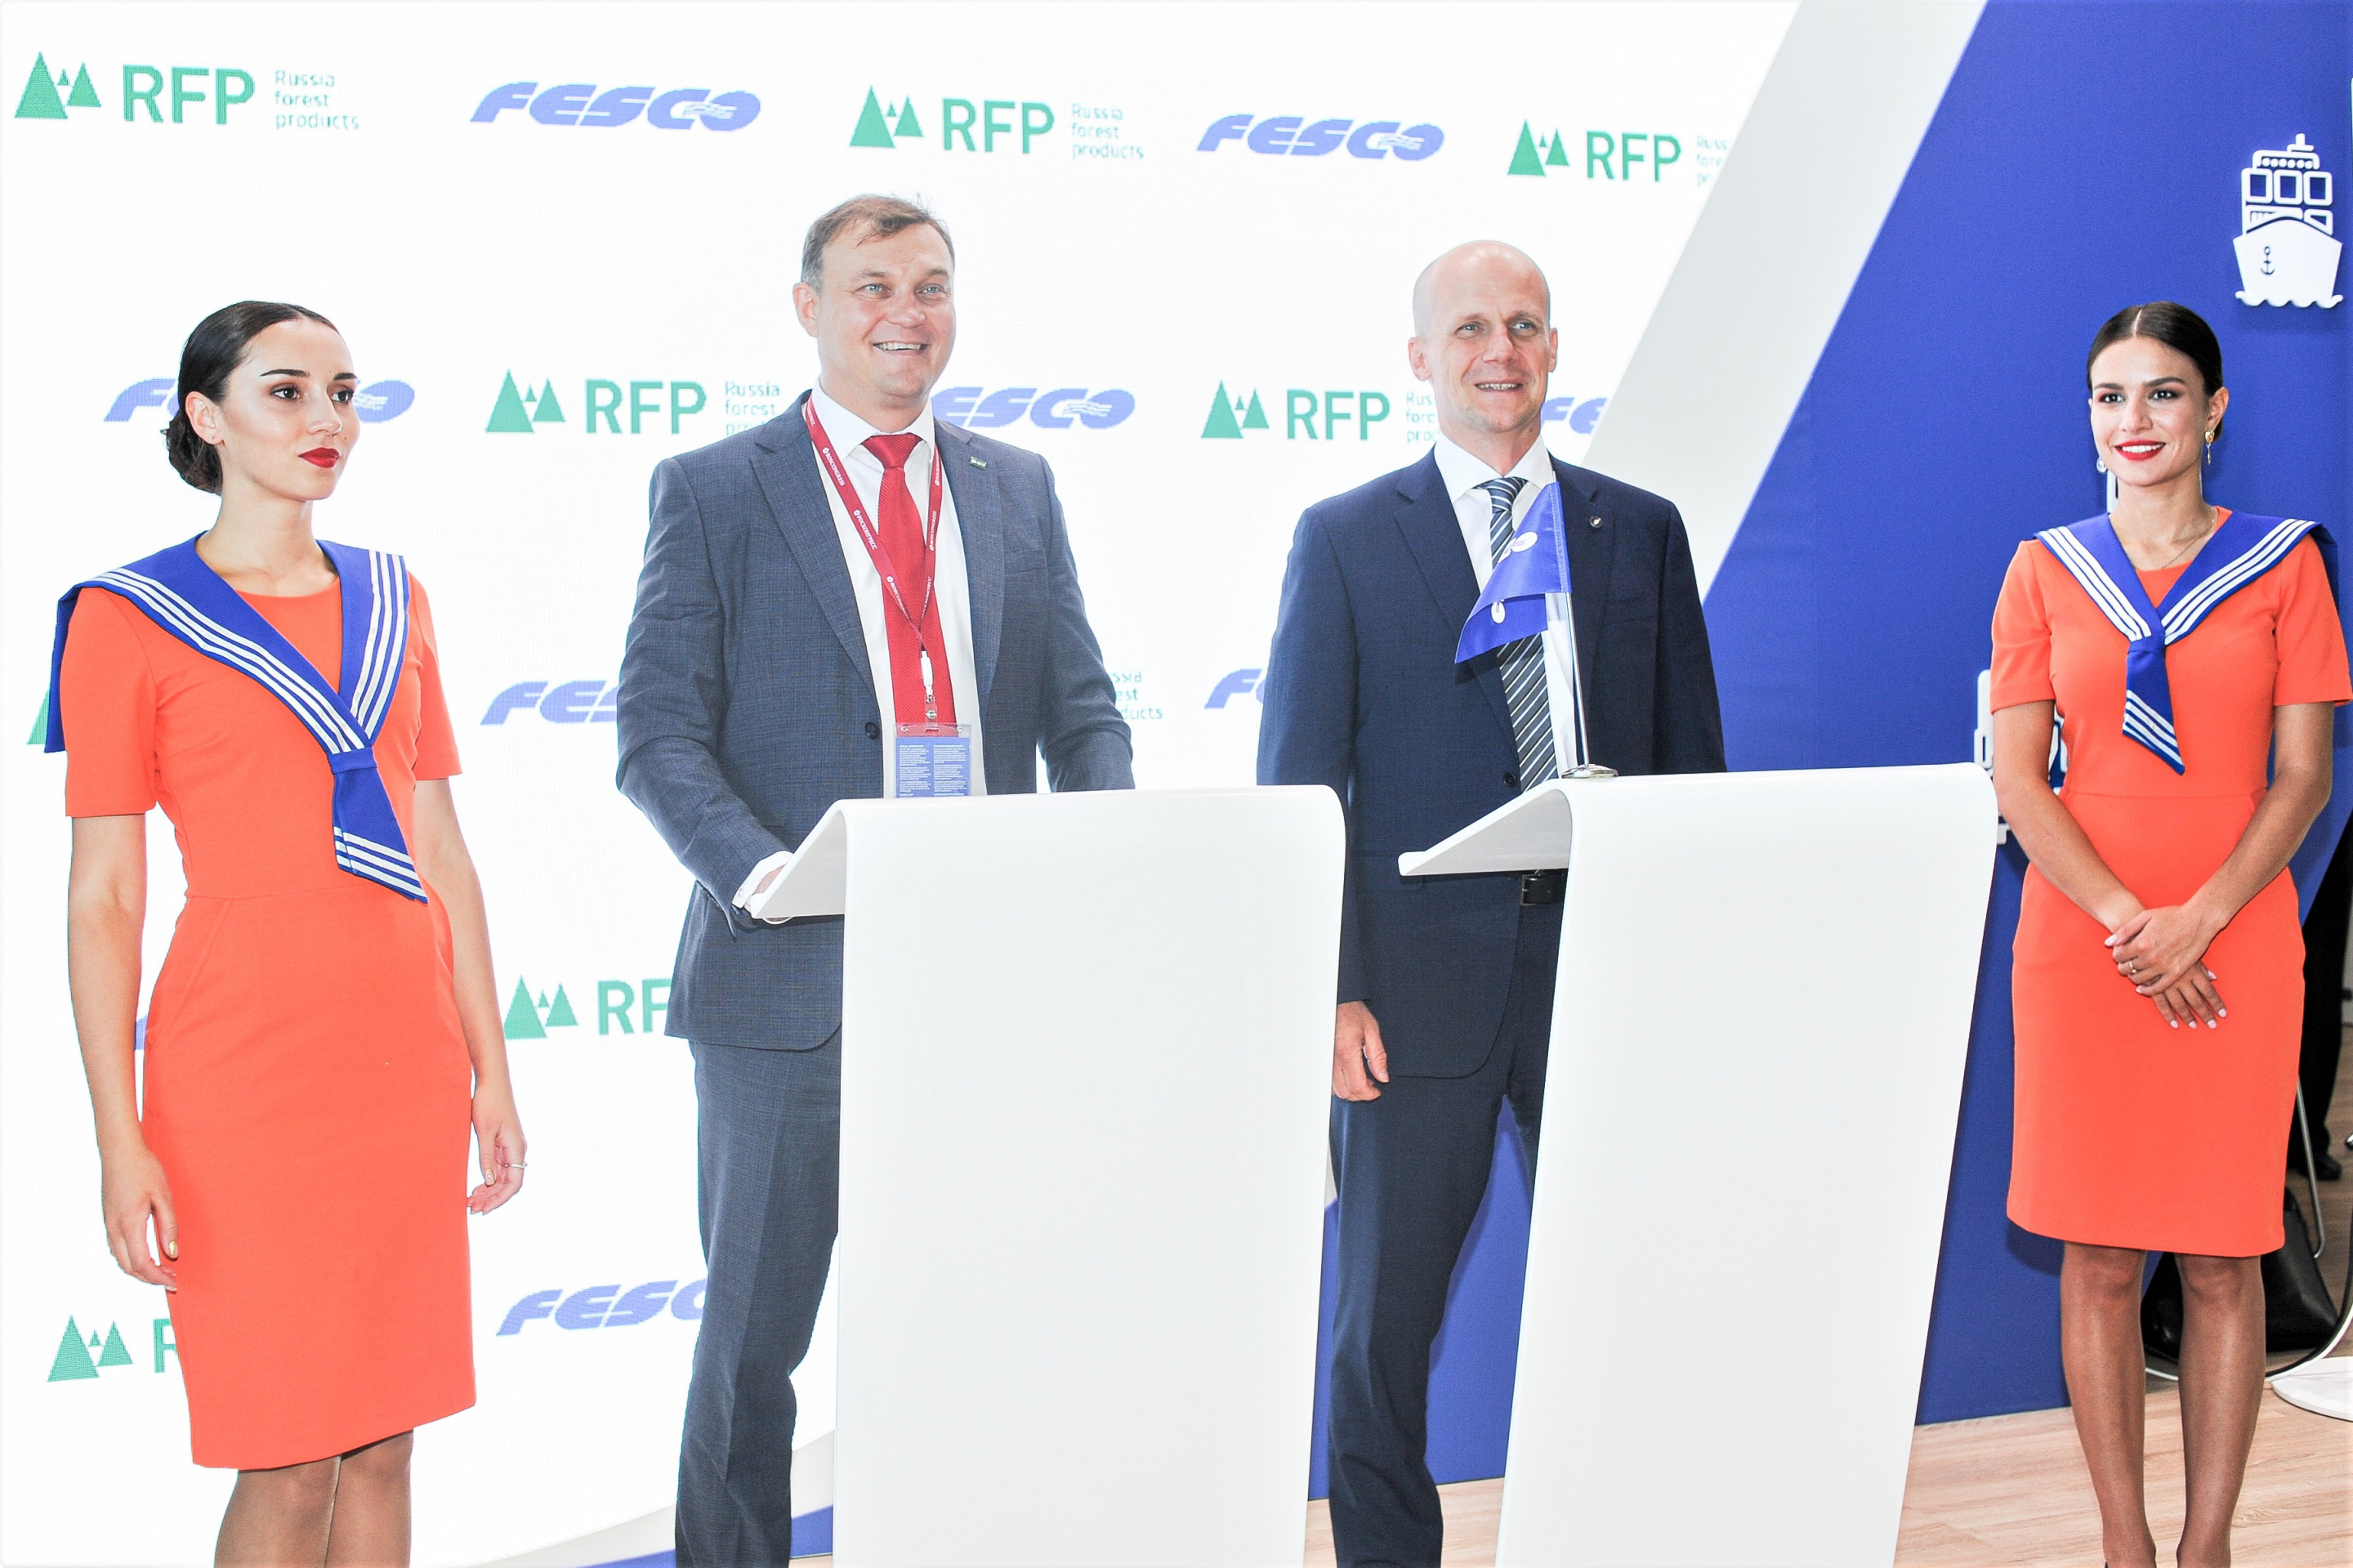 FESCO and RFP Group are to establish cooperation in export of sawn timber to Japan, China and Korea